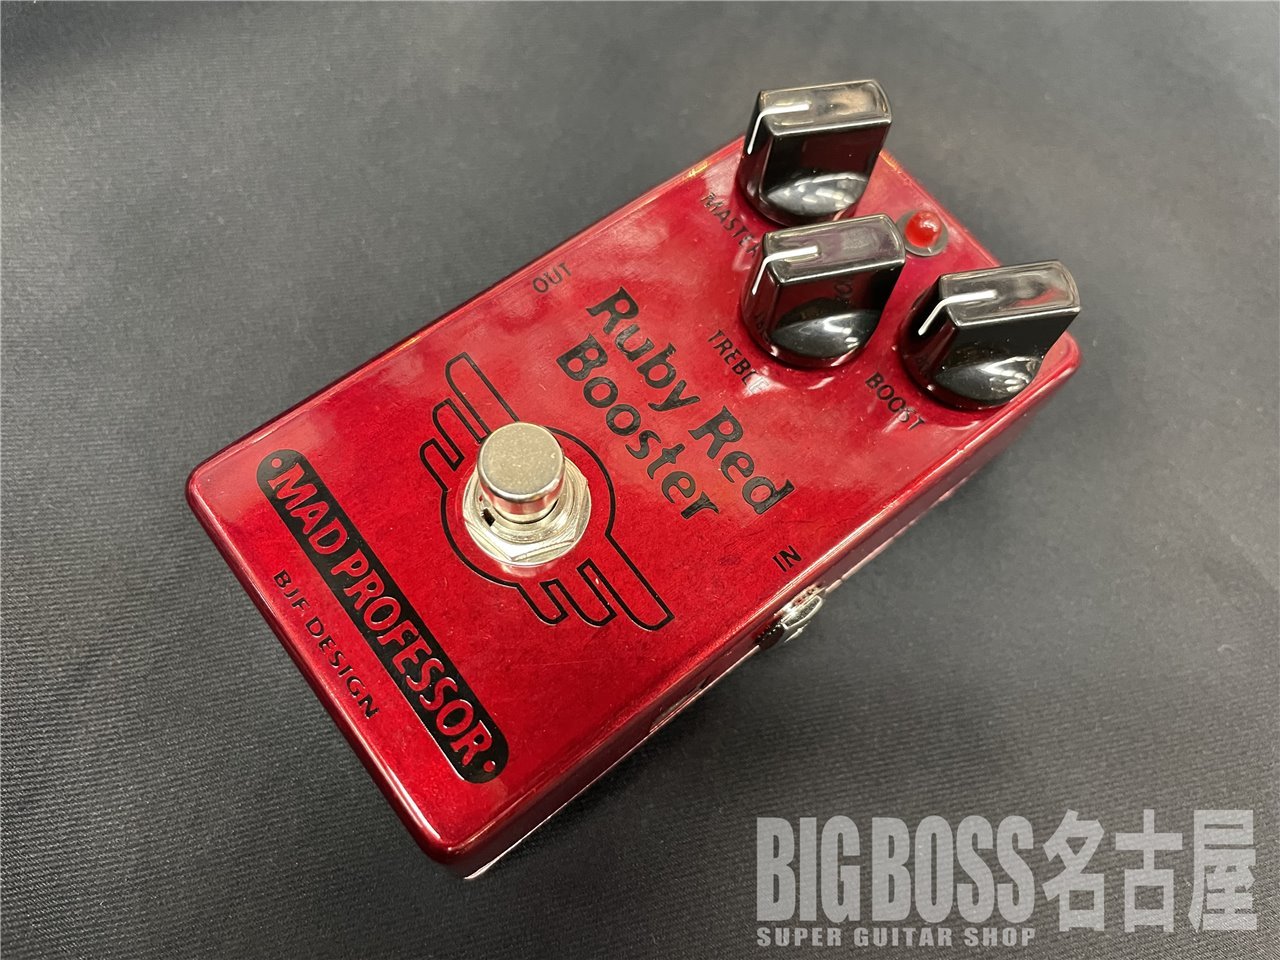 MAD PROFESSOR Ruby Red Booster トレブルブースター